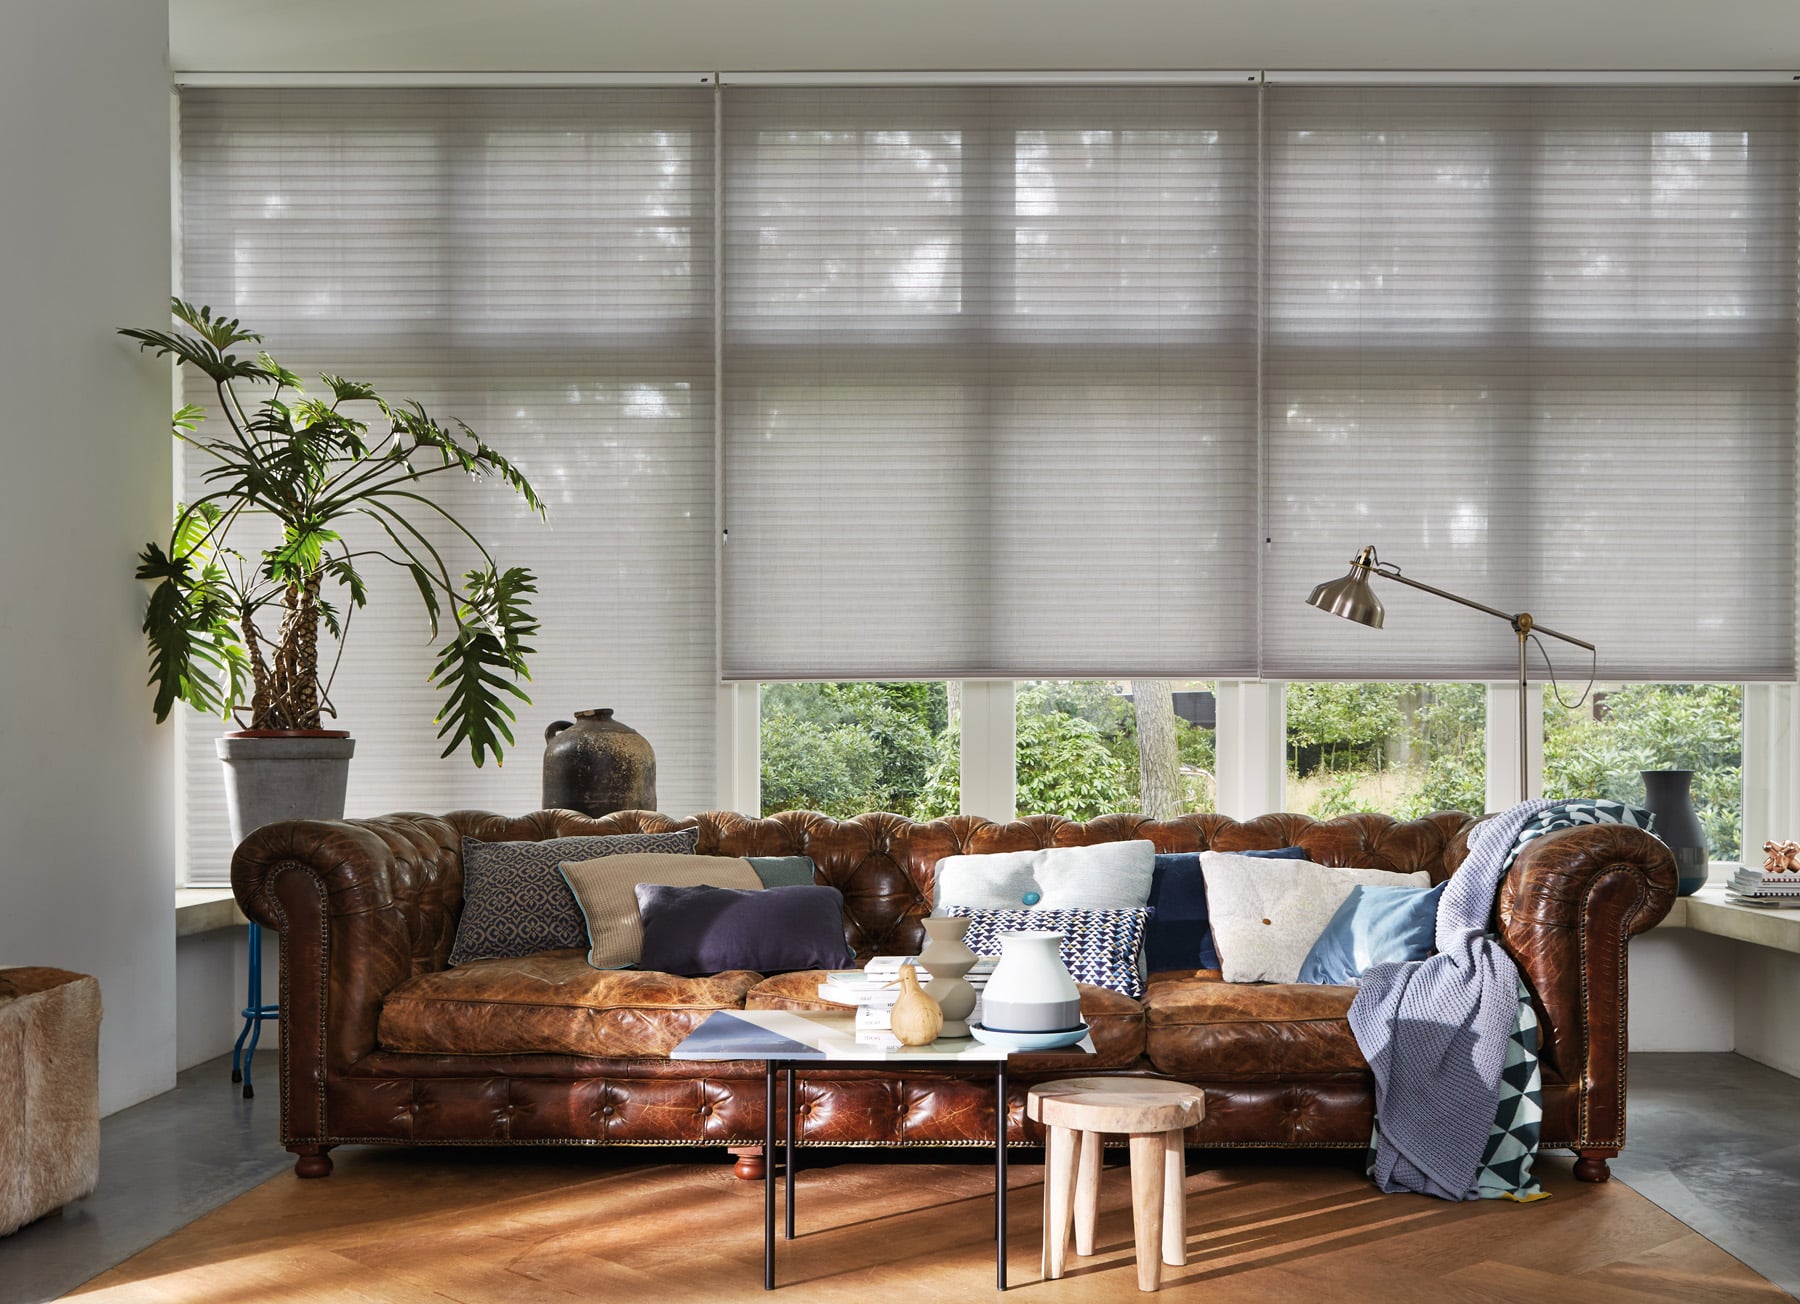 Duette Shades for Living Spaces